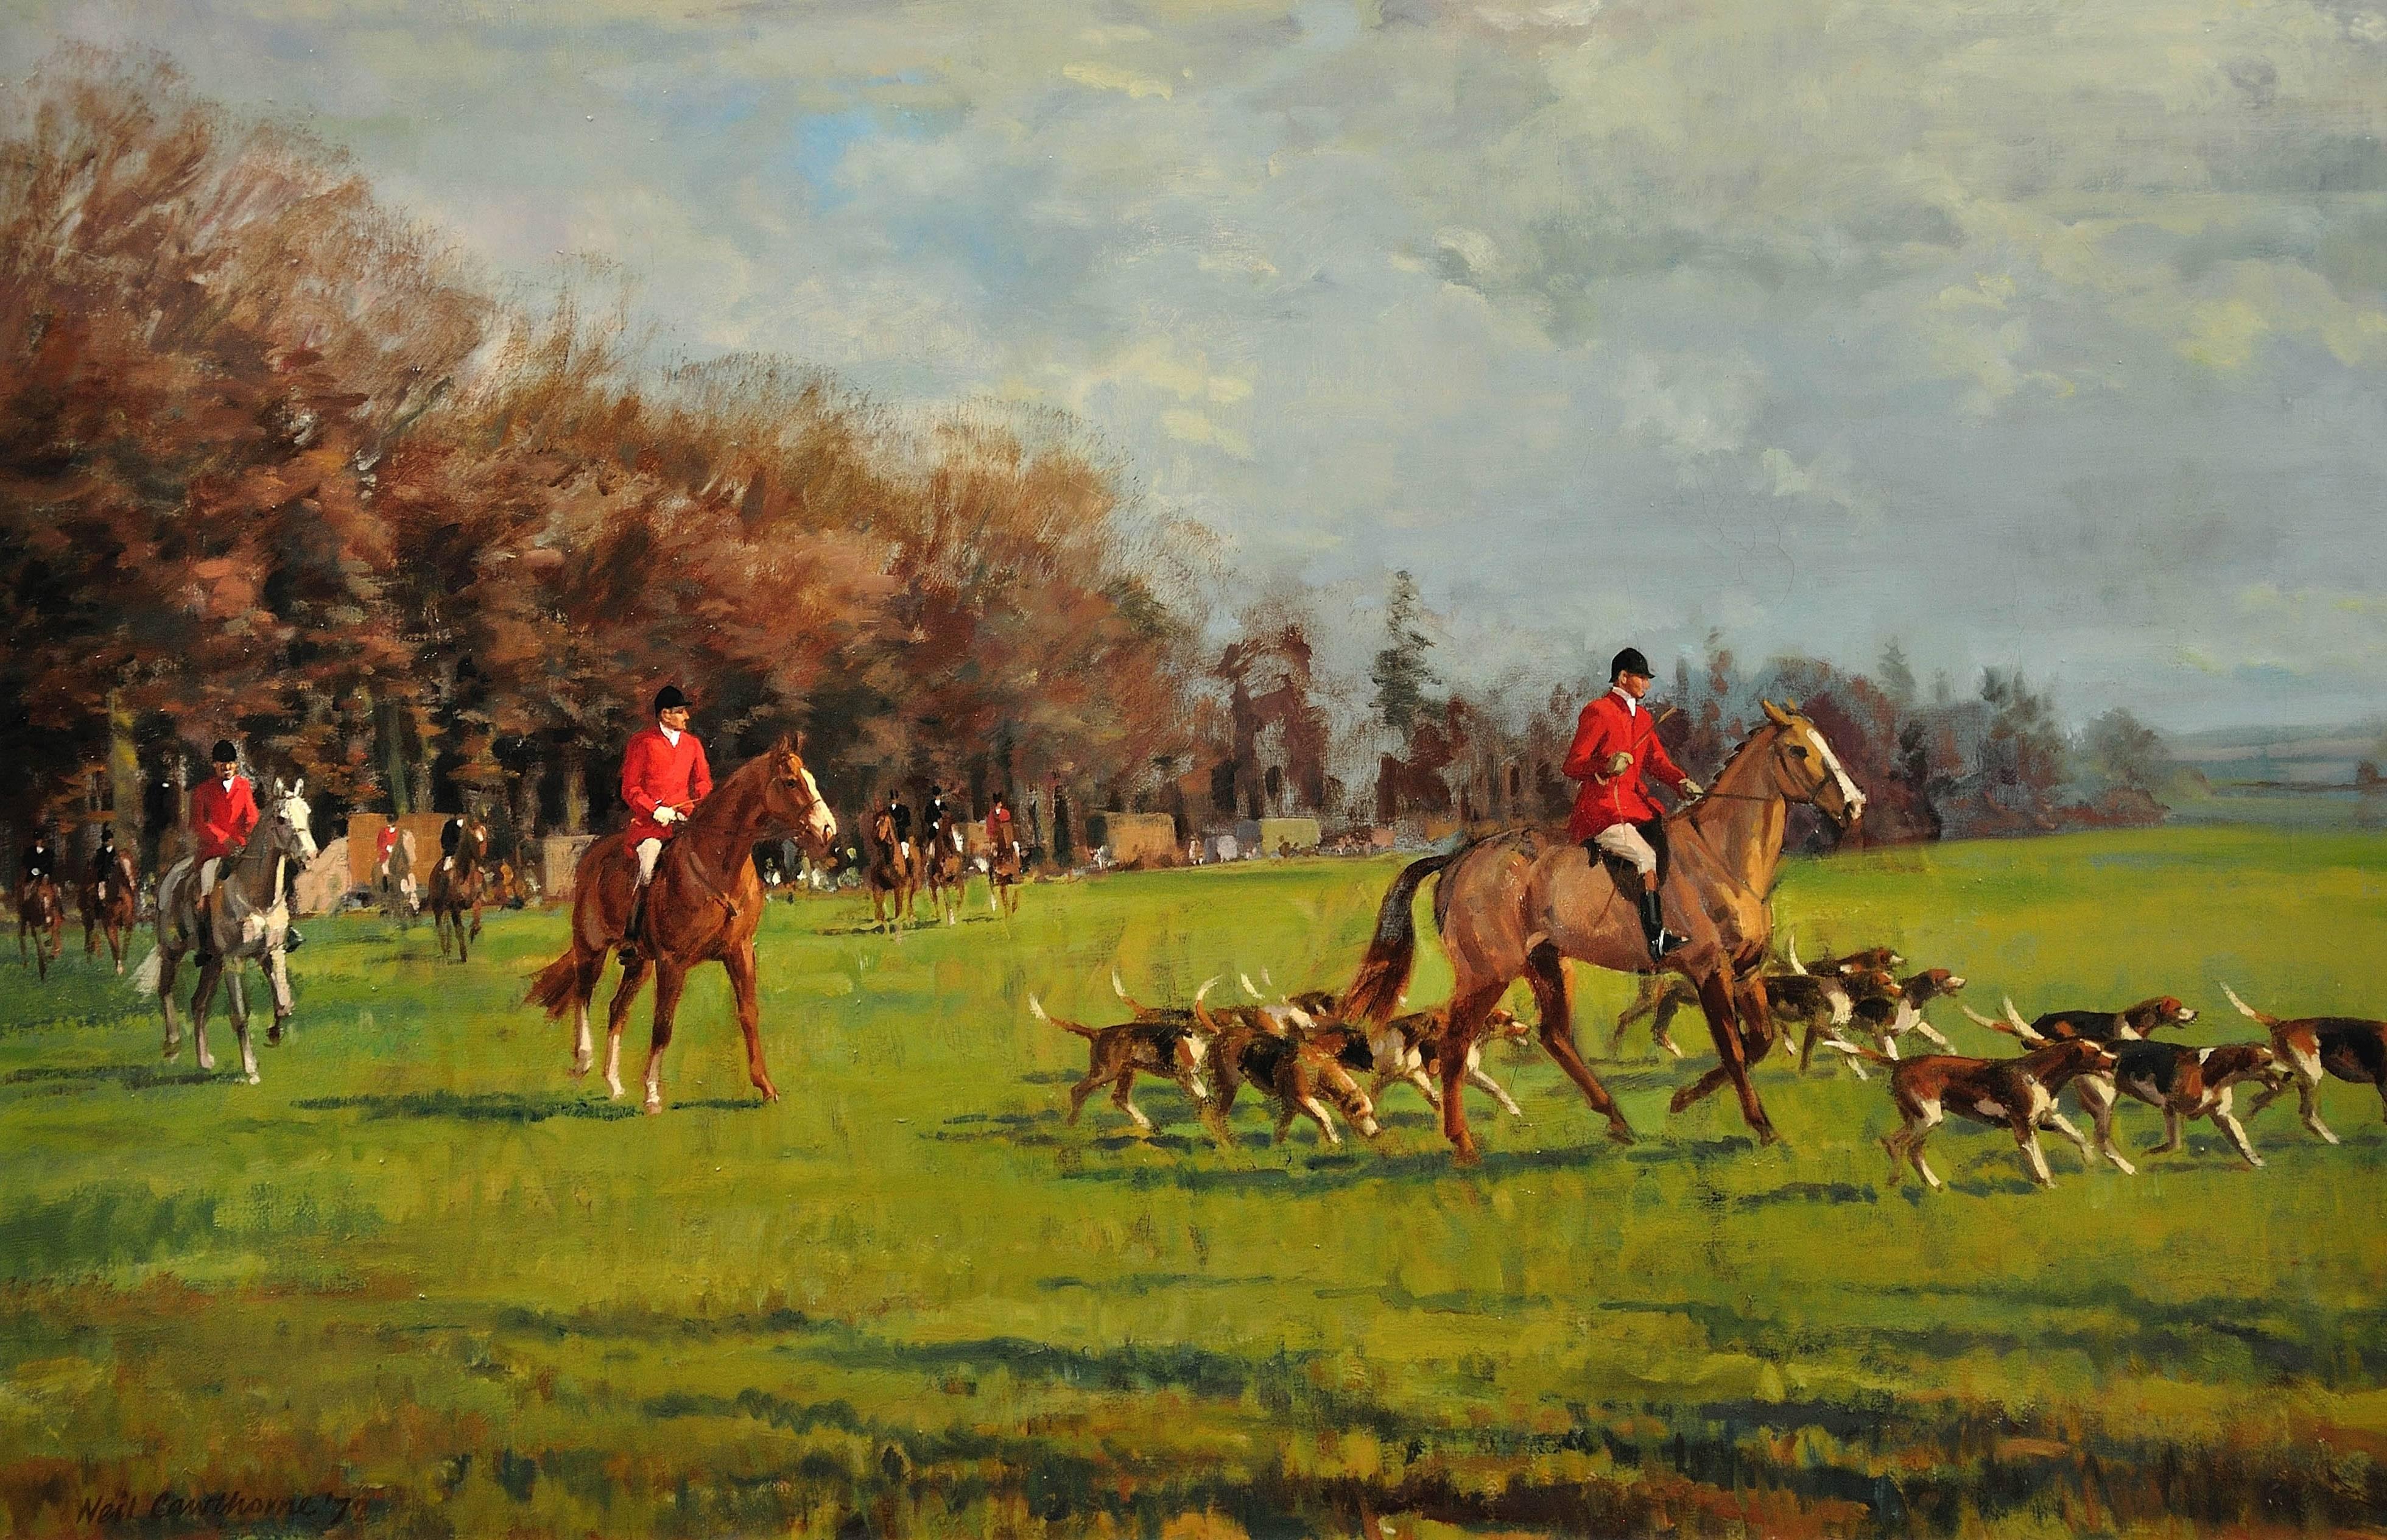 The Fernie Hunt, Opening Meet at Gumley, Leicestershire - Painting by Neil Cawthorne